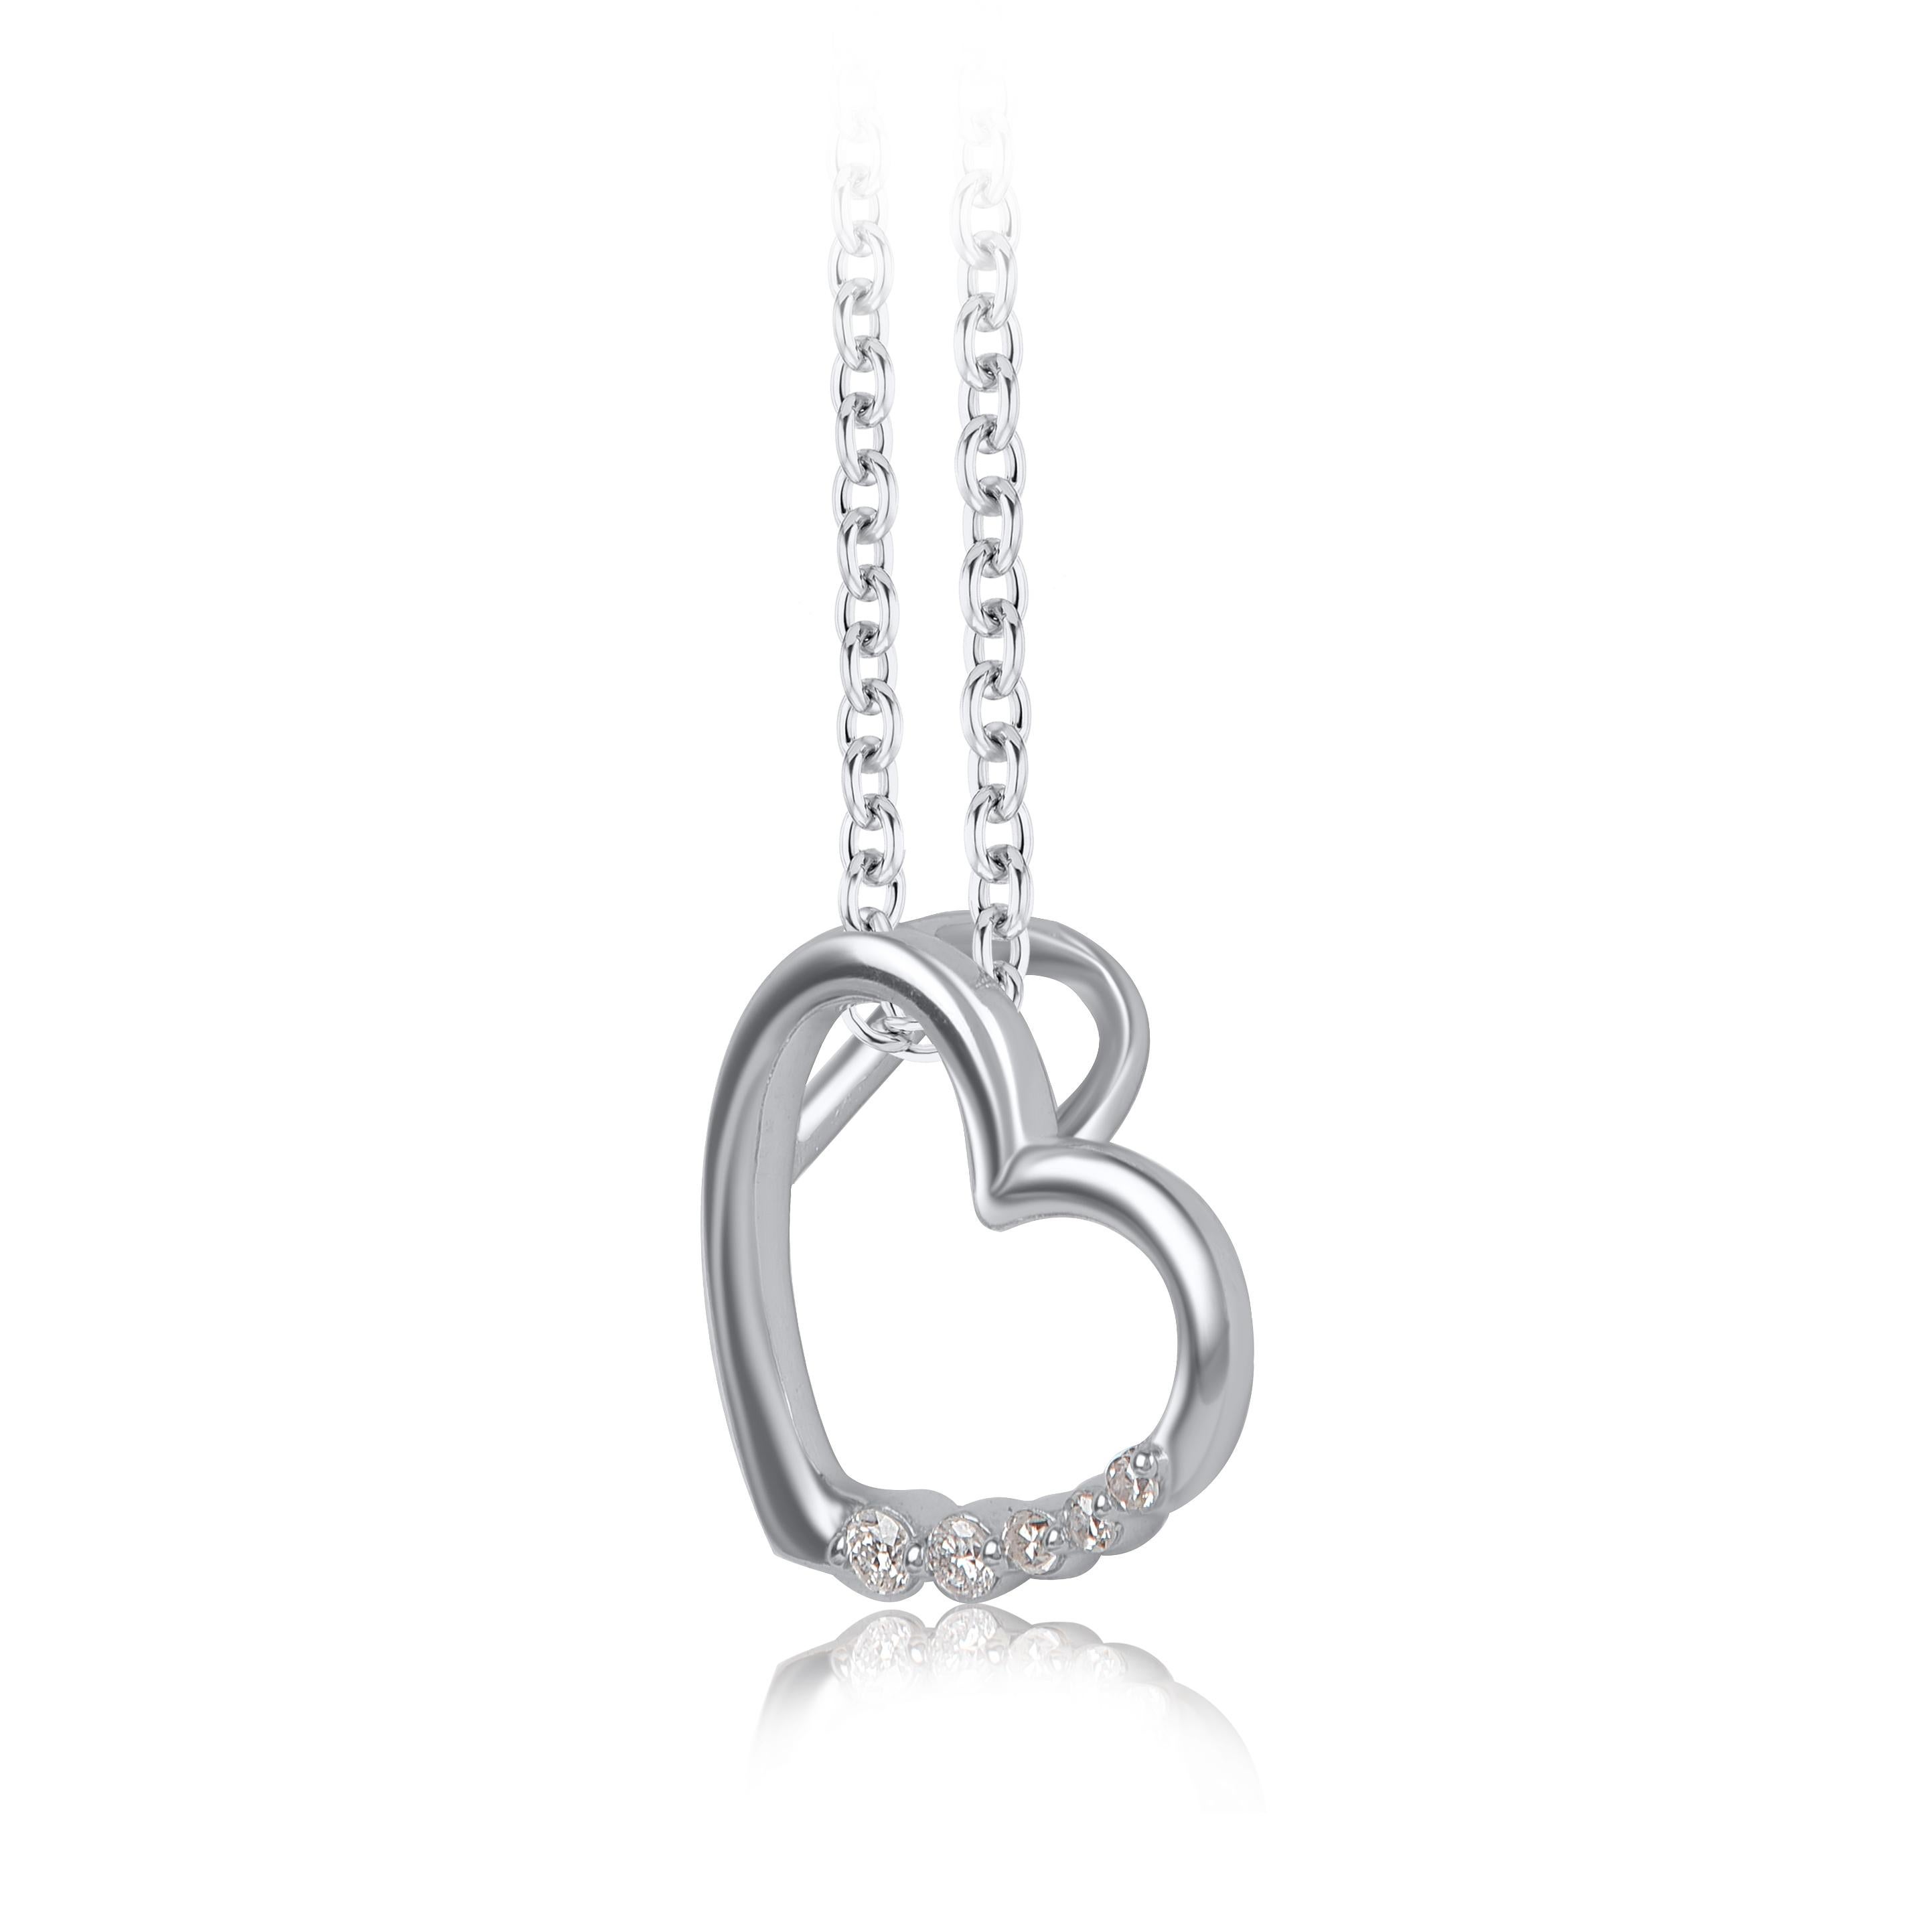 Surprise the one you love with this mesmerizing diamond heart pendant. This heart pendant is crafted from 14-karat white gold and features 5 single cut & brilliant cut diamonds set in prong setting. H-I color I2 clarity and a high polish finish